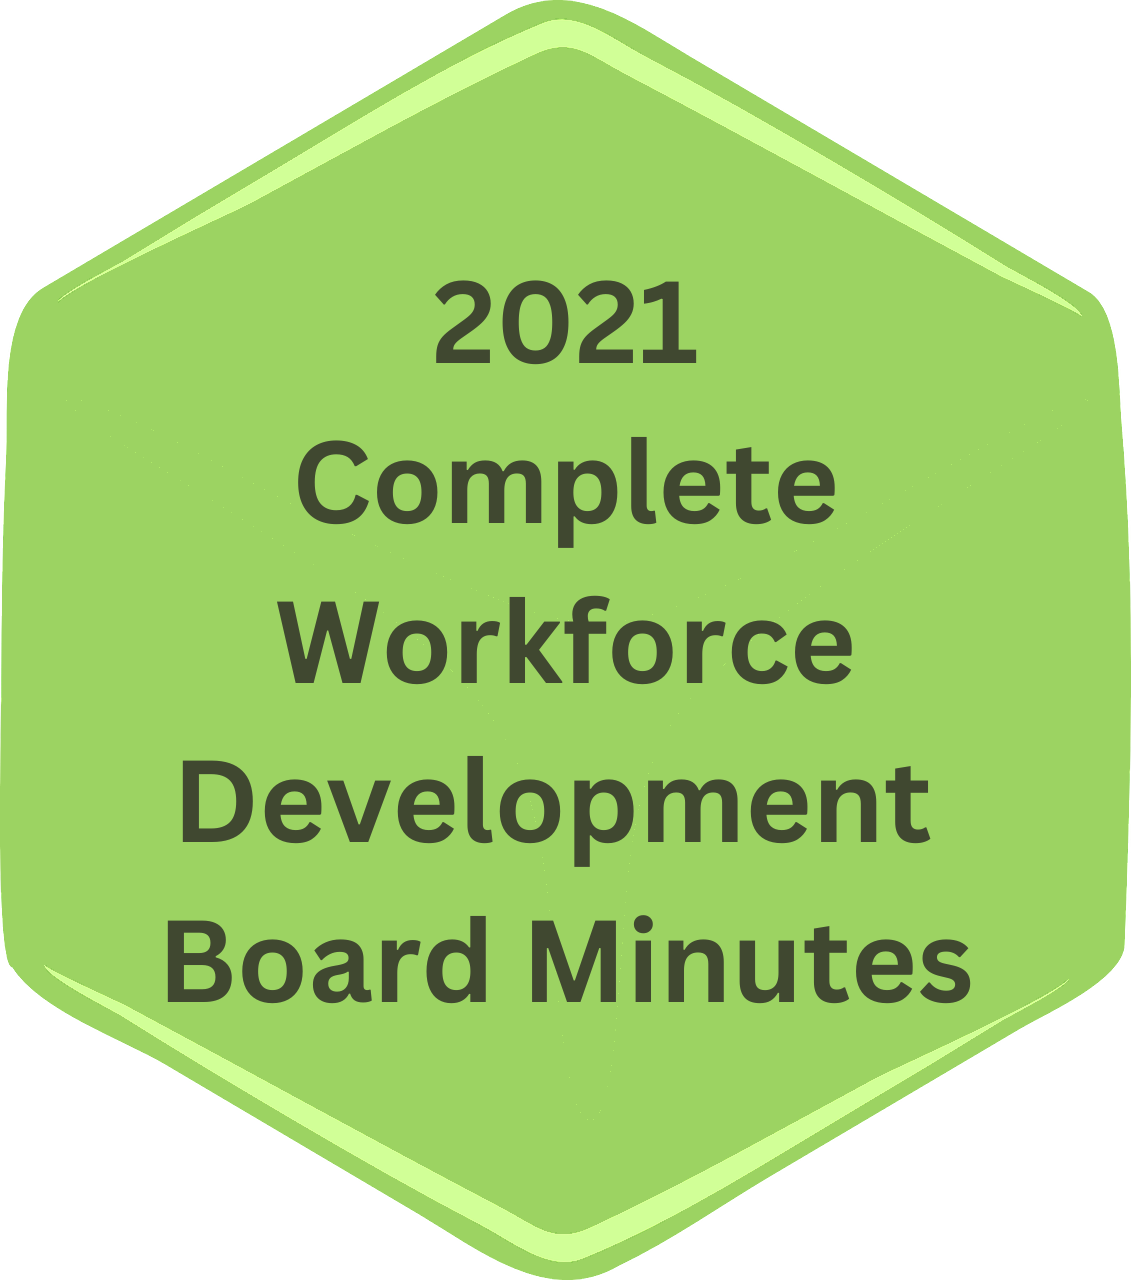 Workforce%20Development%20Board%20Meeting%20Minutes%20BUTTON%20(1).png